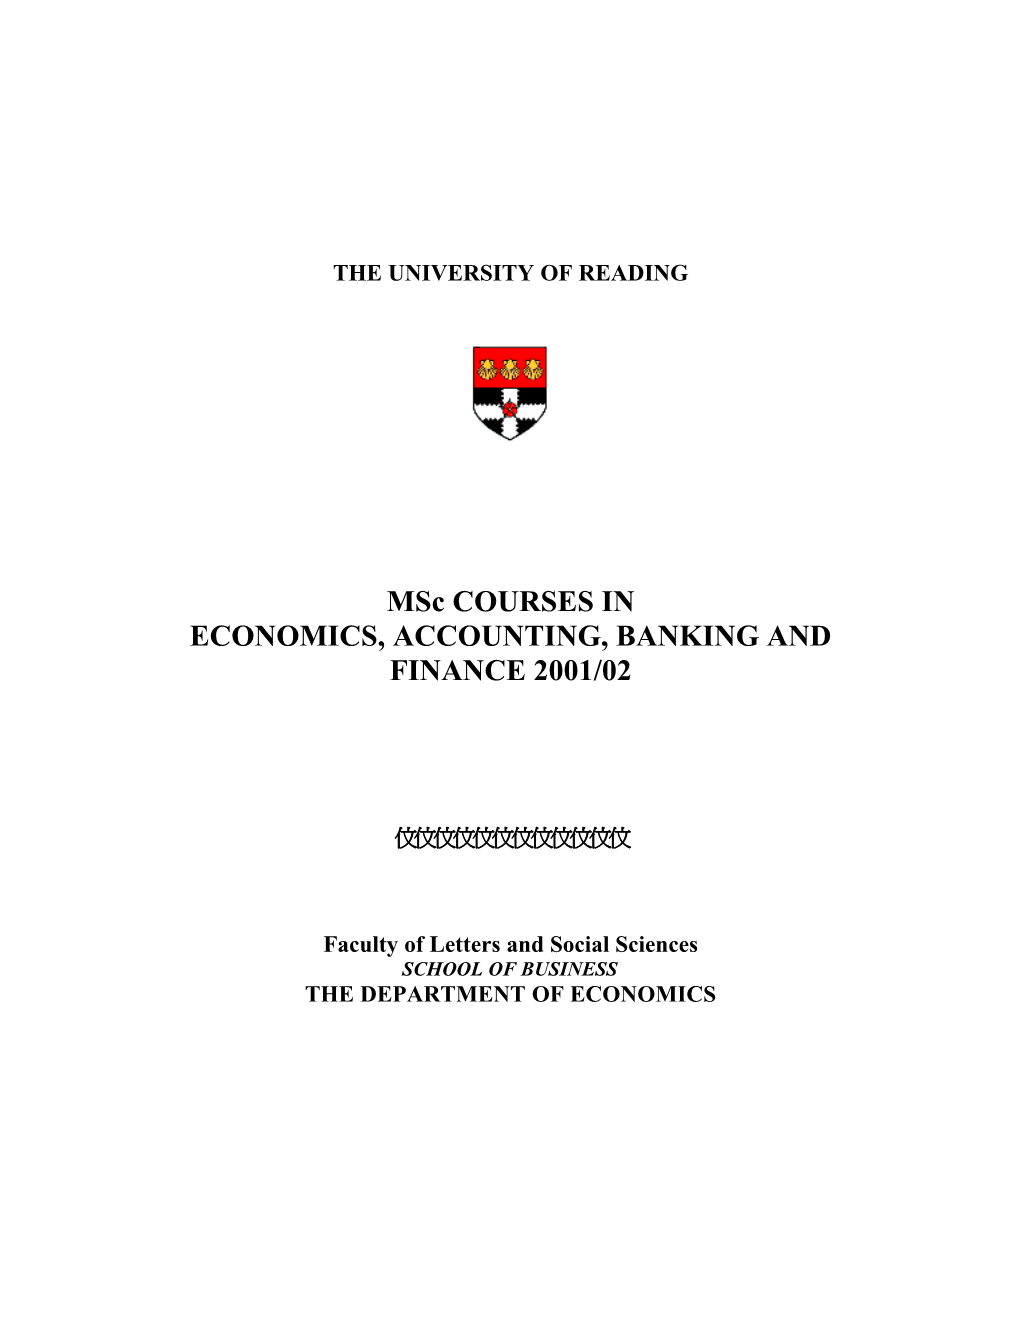 Economics, Accounting, Banking and Finance 2001/02